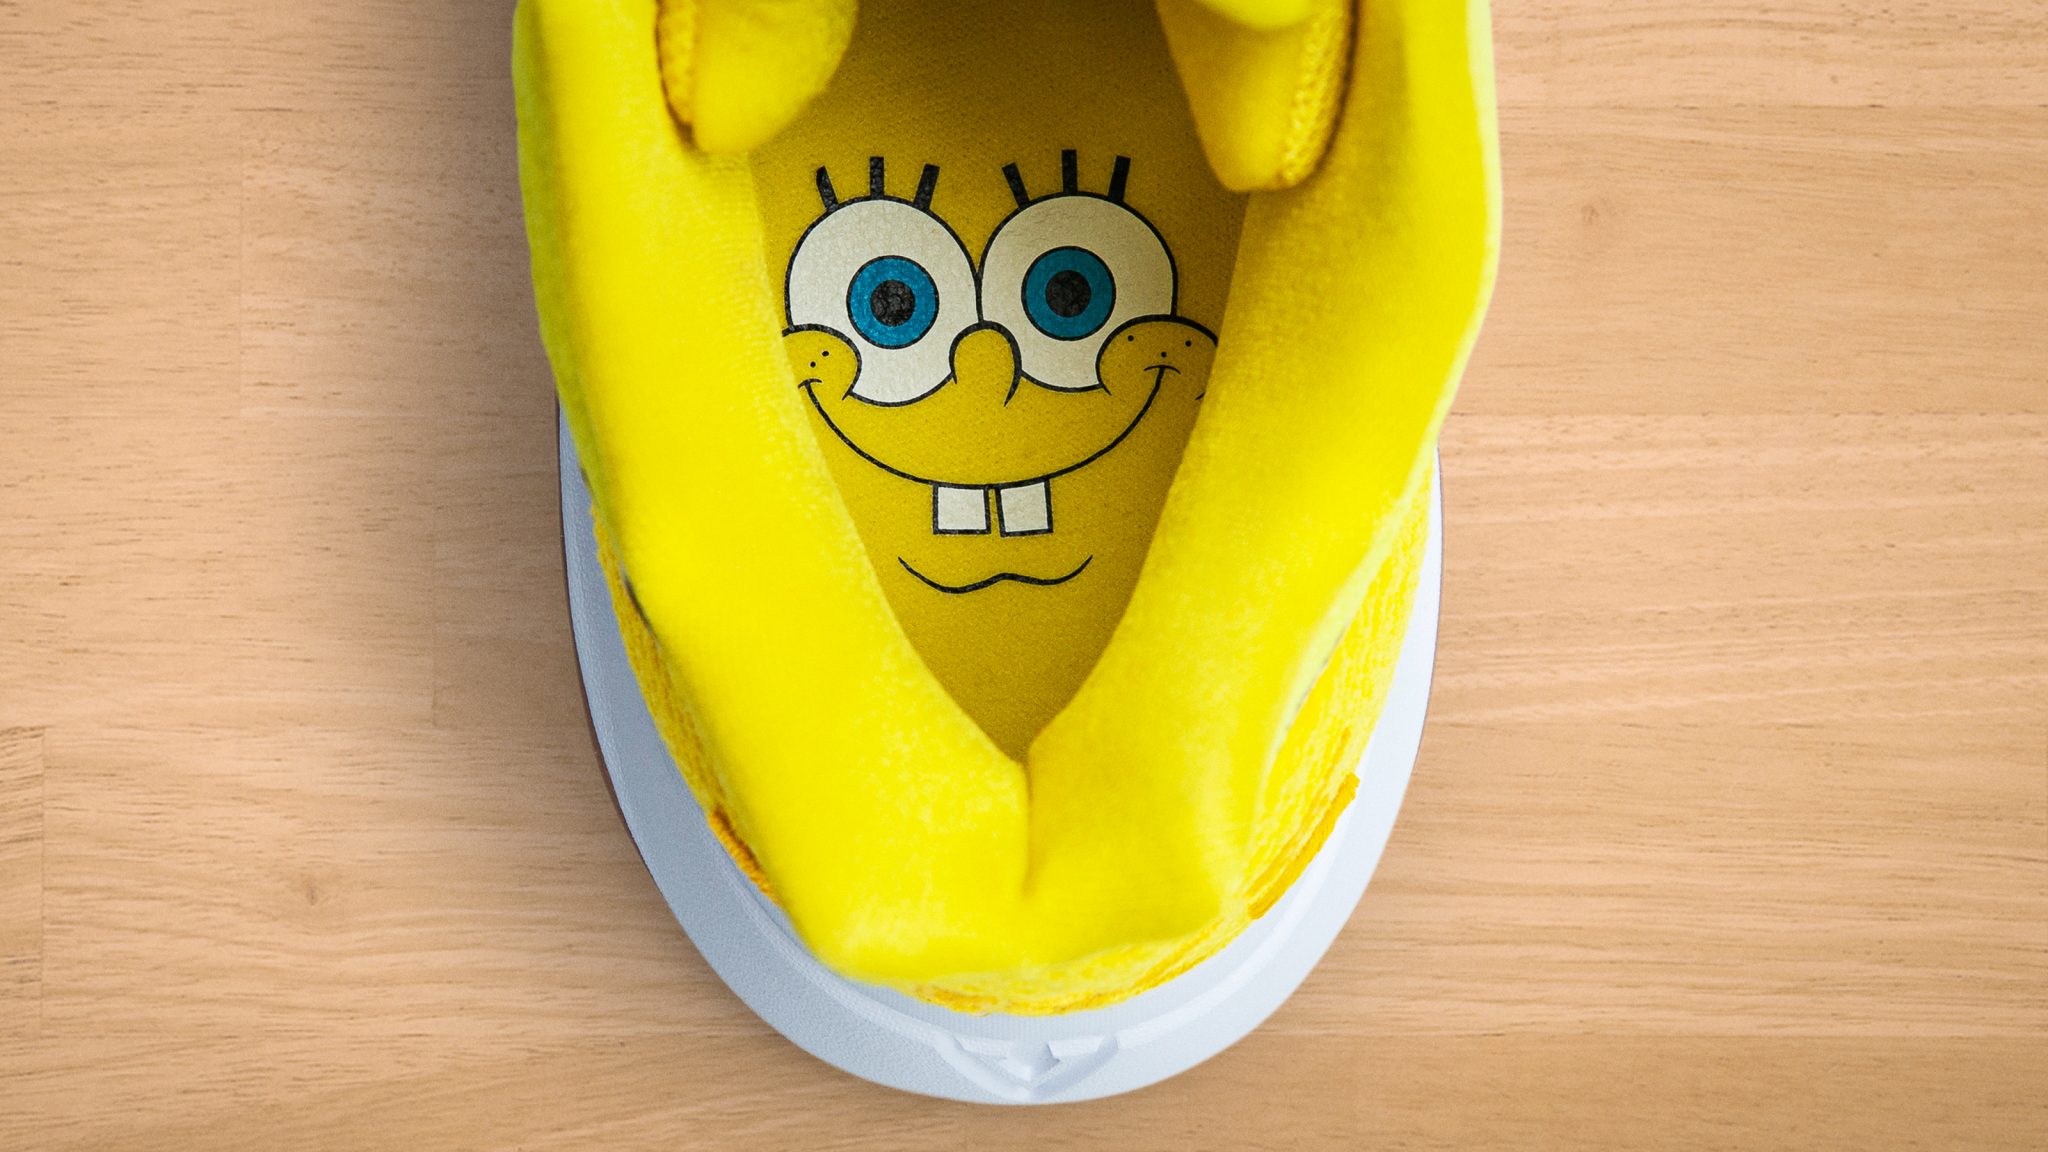 Nike and Viacom Nickelodeon Consumer Products Launch the Kyrie X Spongebob Squarepants Collection image